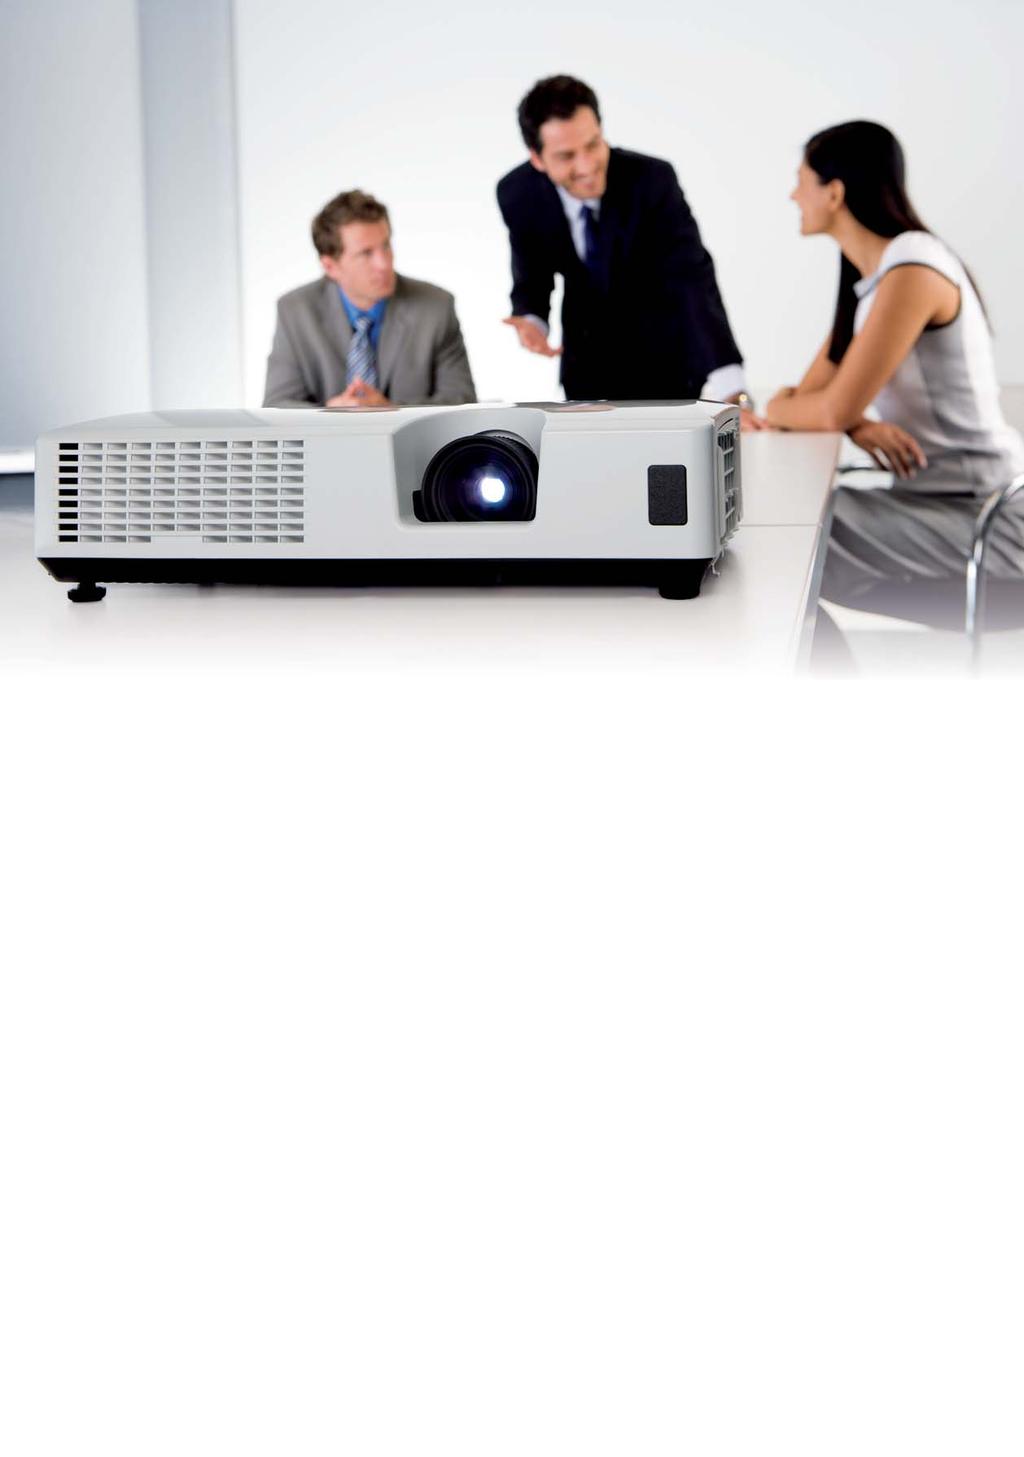 CPX4 Network functions Quick and easy network presentations Hitachi s MIU LiveViewer software* provides a quick and easy connection wizard for setting up a wired or wireless